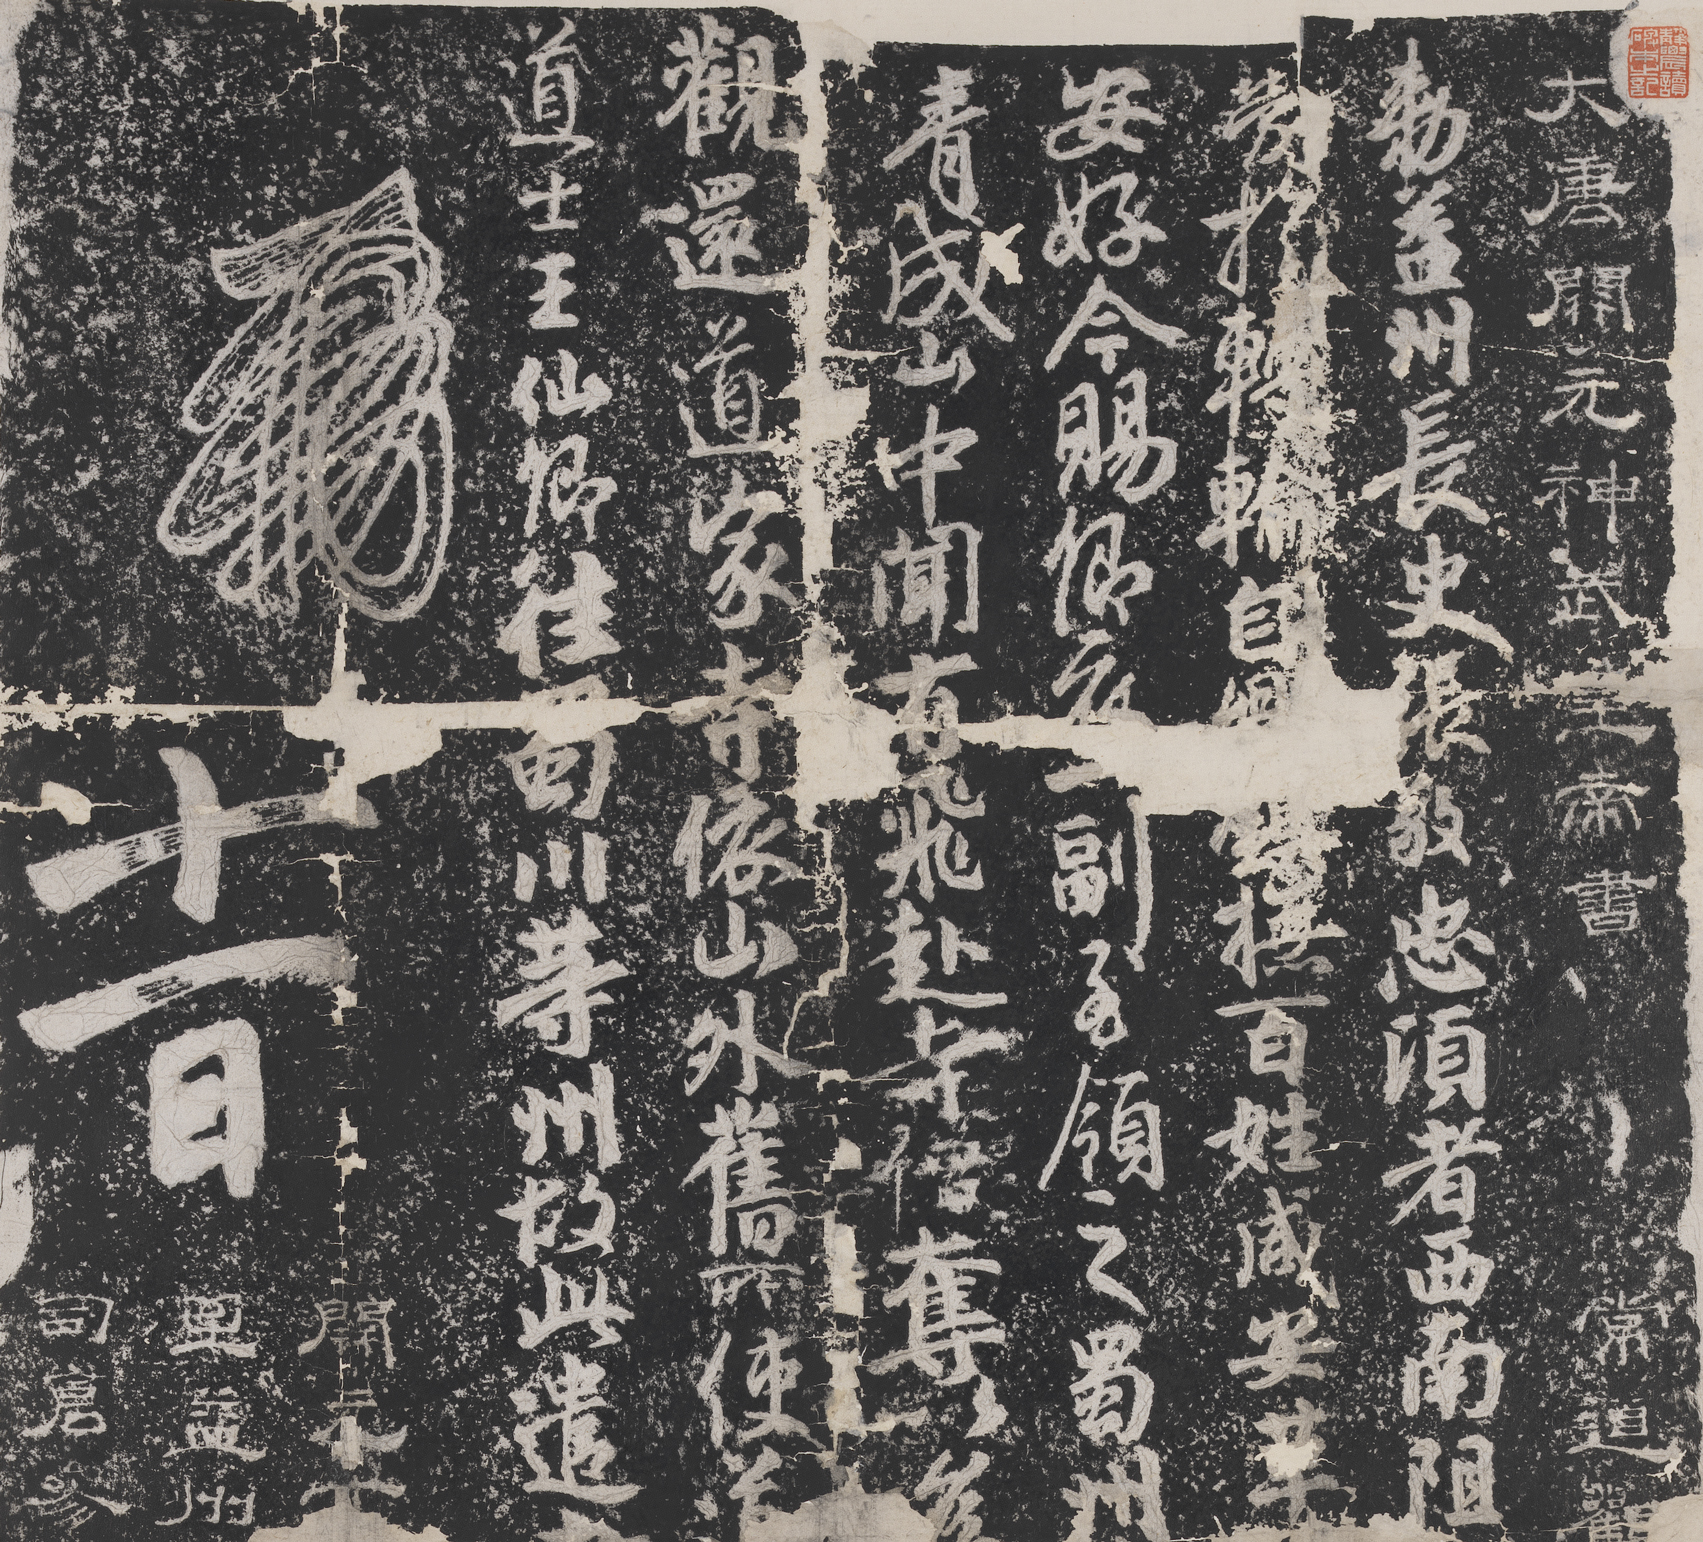 Ink Rubbing of the Decree for Changdao Abbey